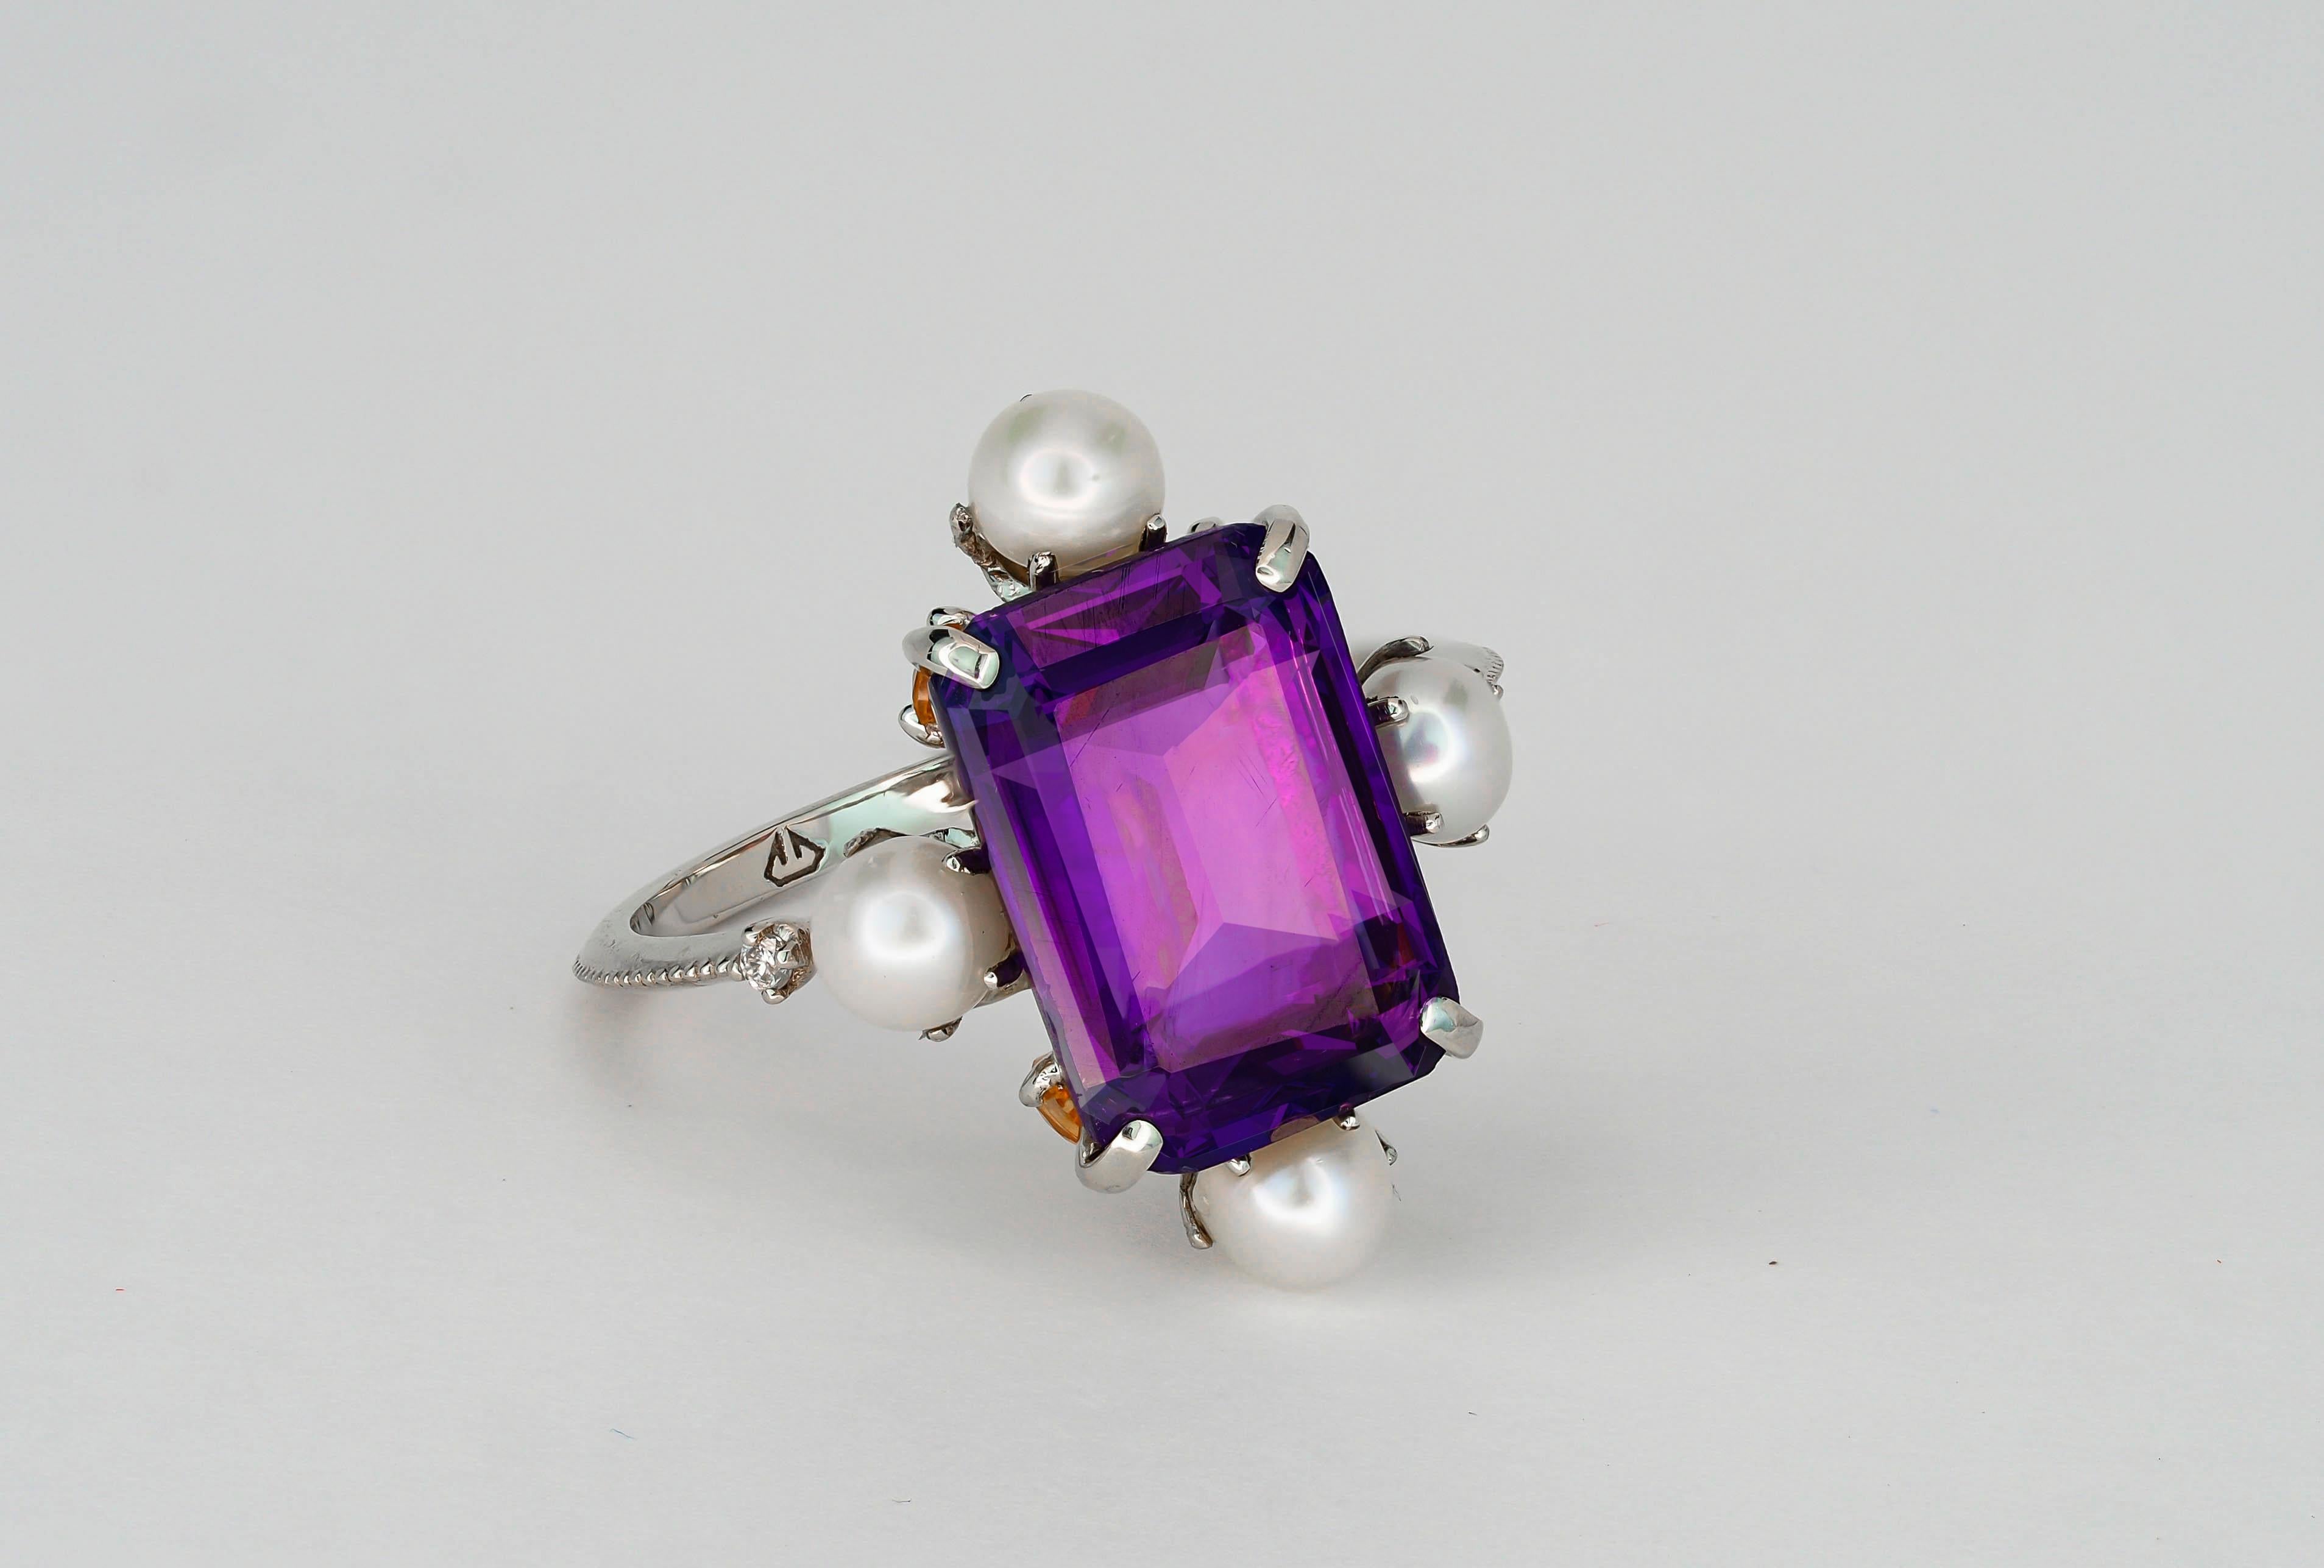 For Sale:  Amethyst ring in 14k gold.  7